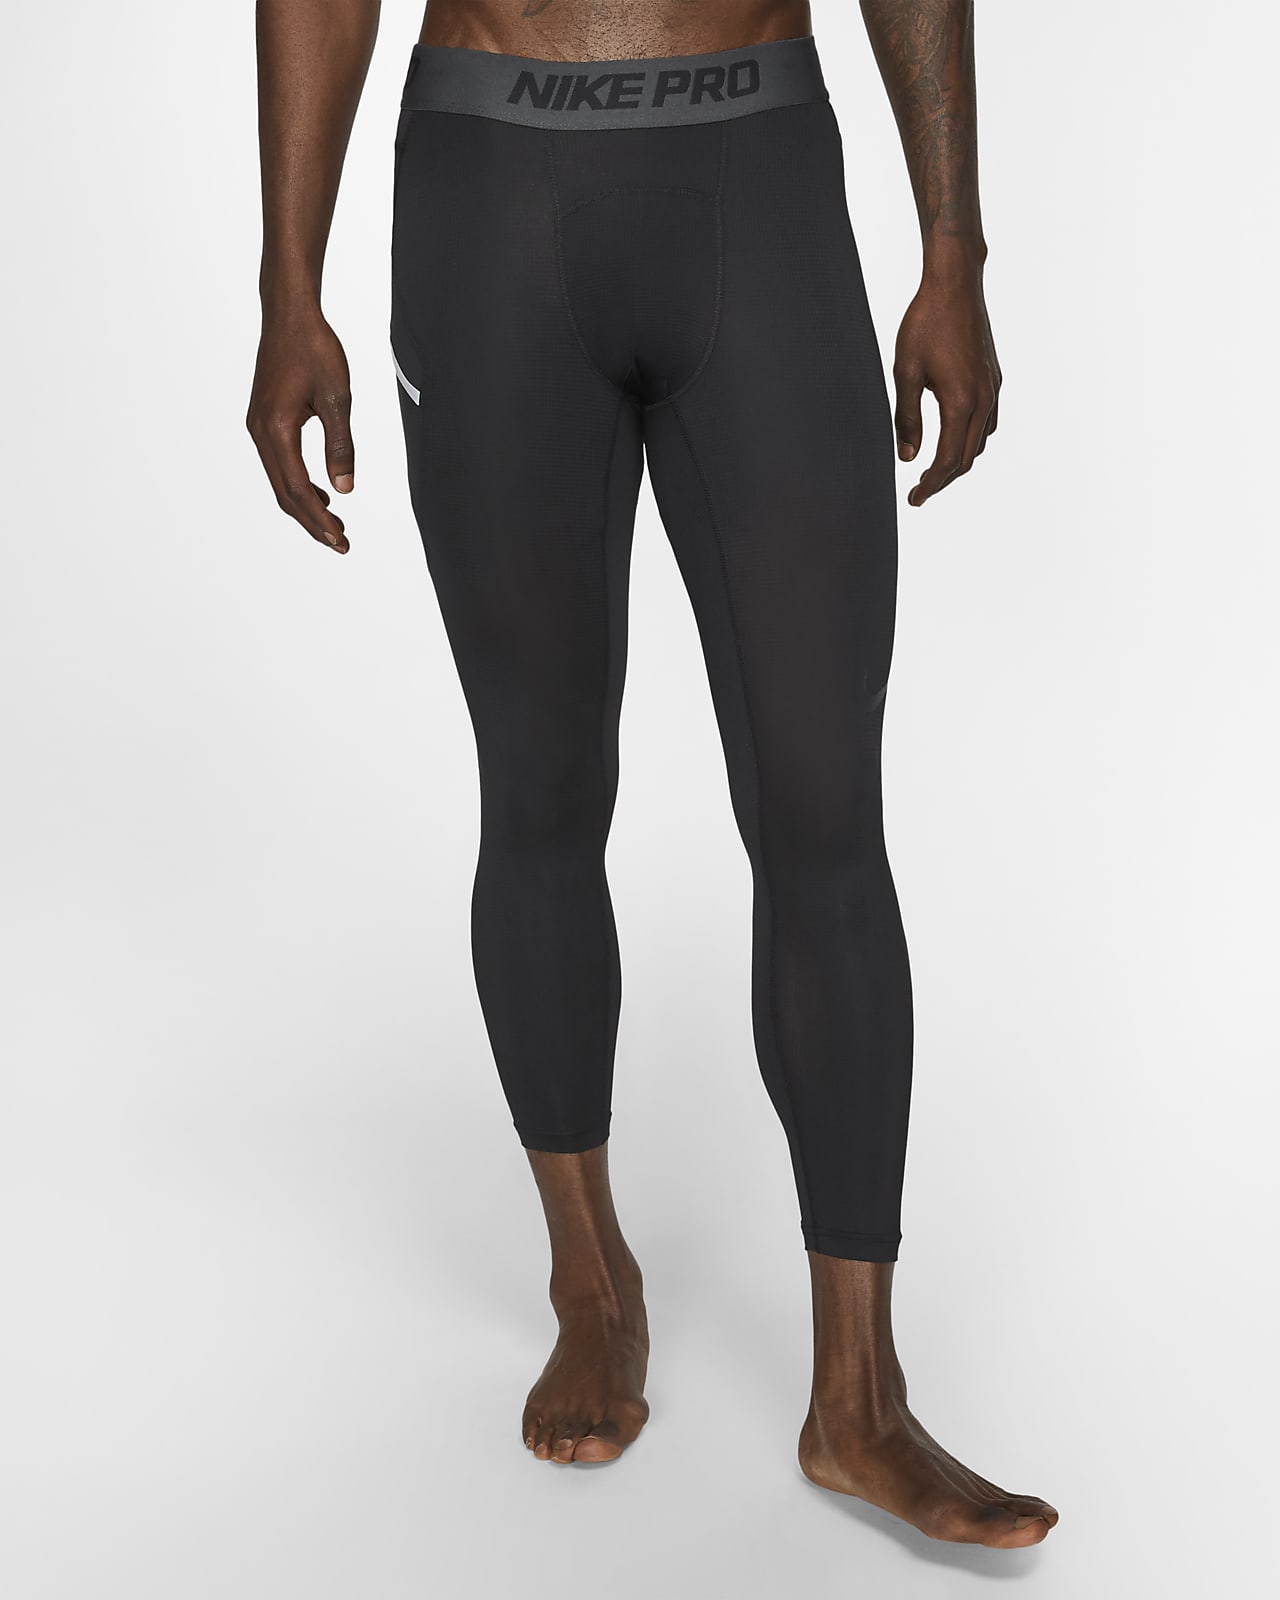 nike football tights with pads